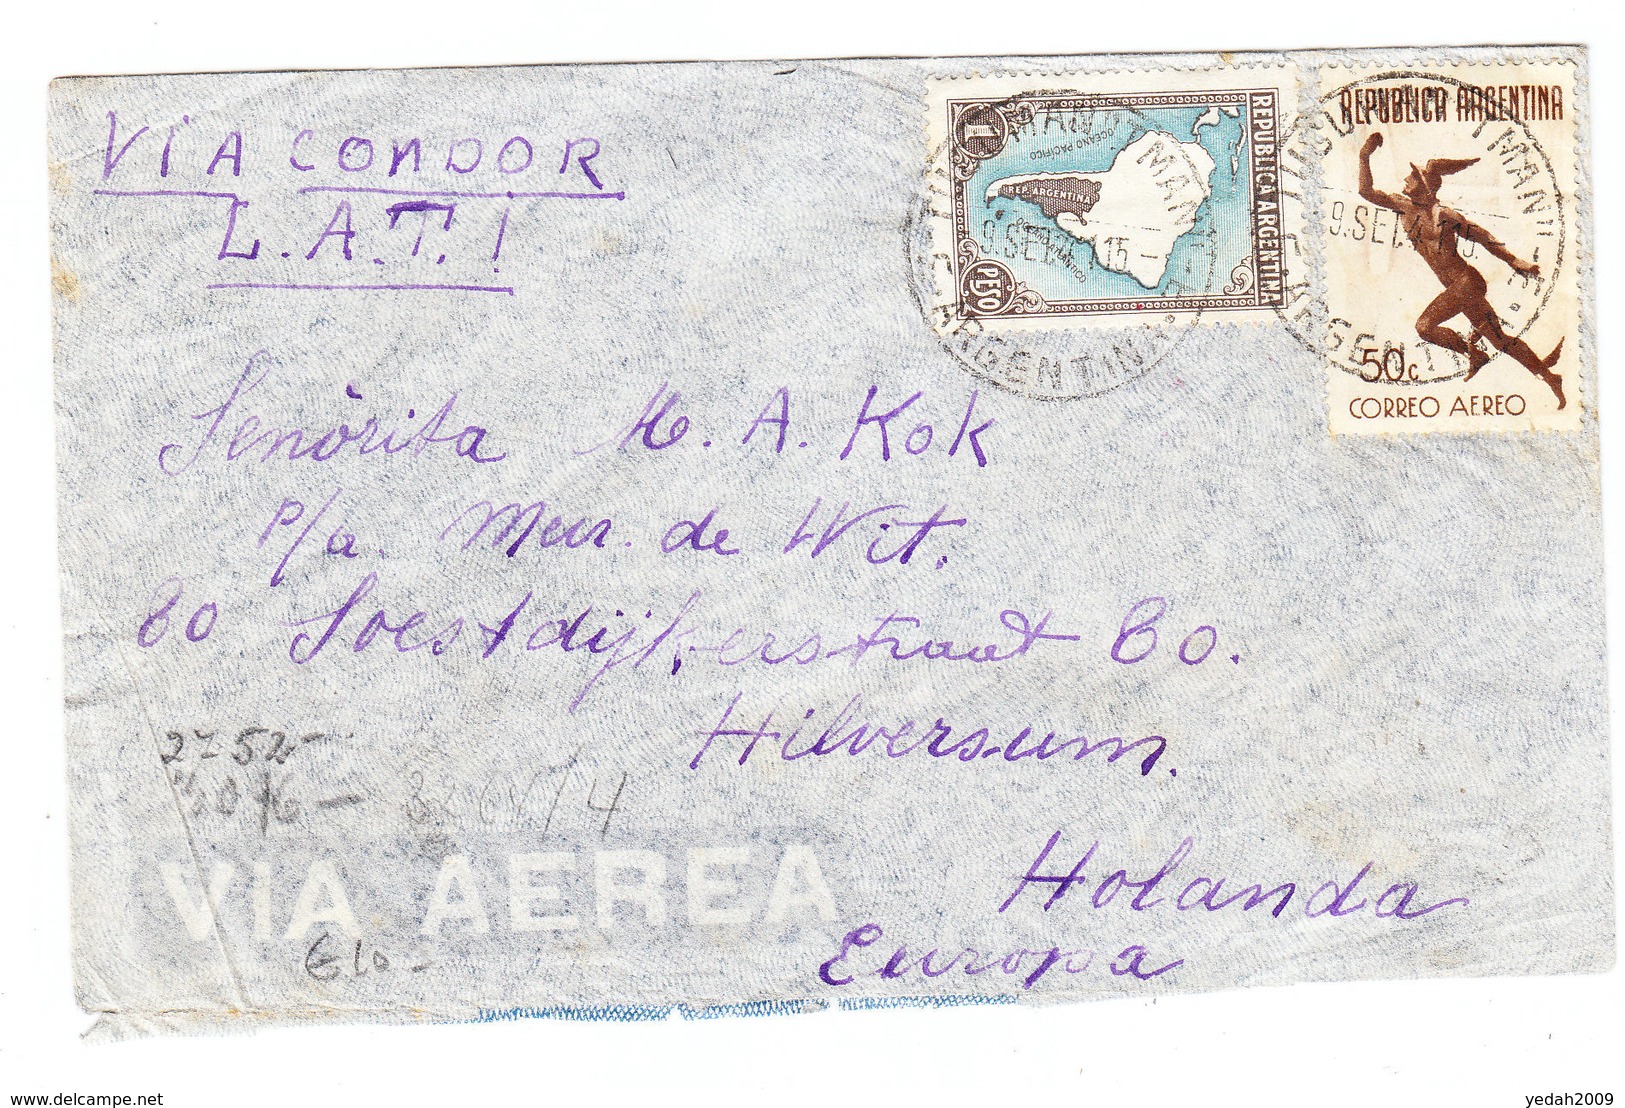 Argentina CONDOR LATI AIRMAIL CENSORED COVER TO Netherlands 1941 - Aéreo